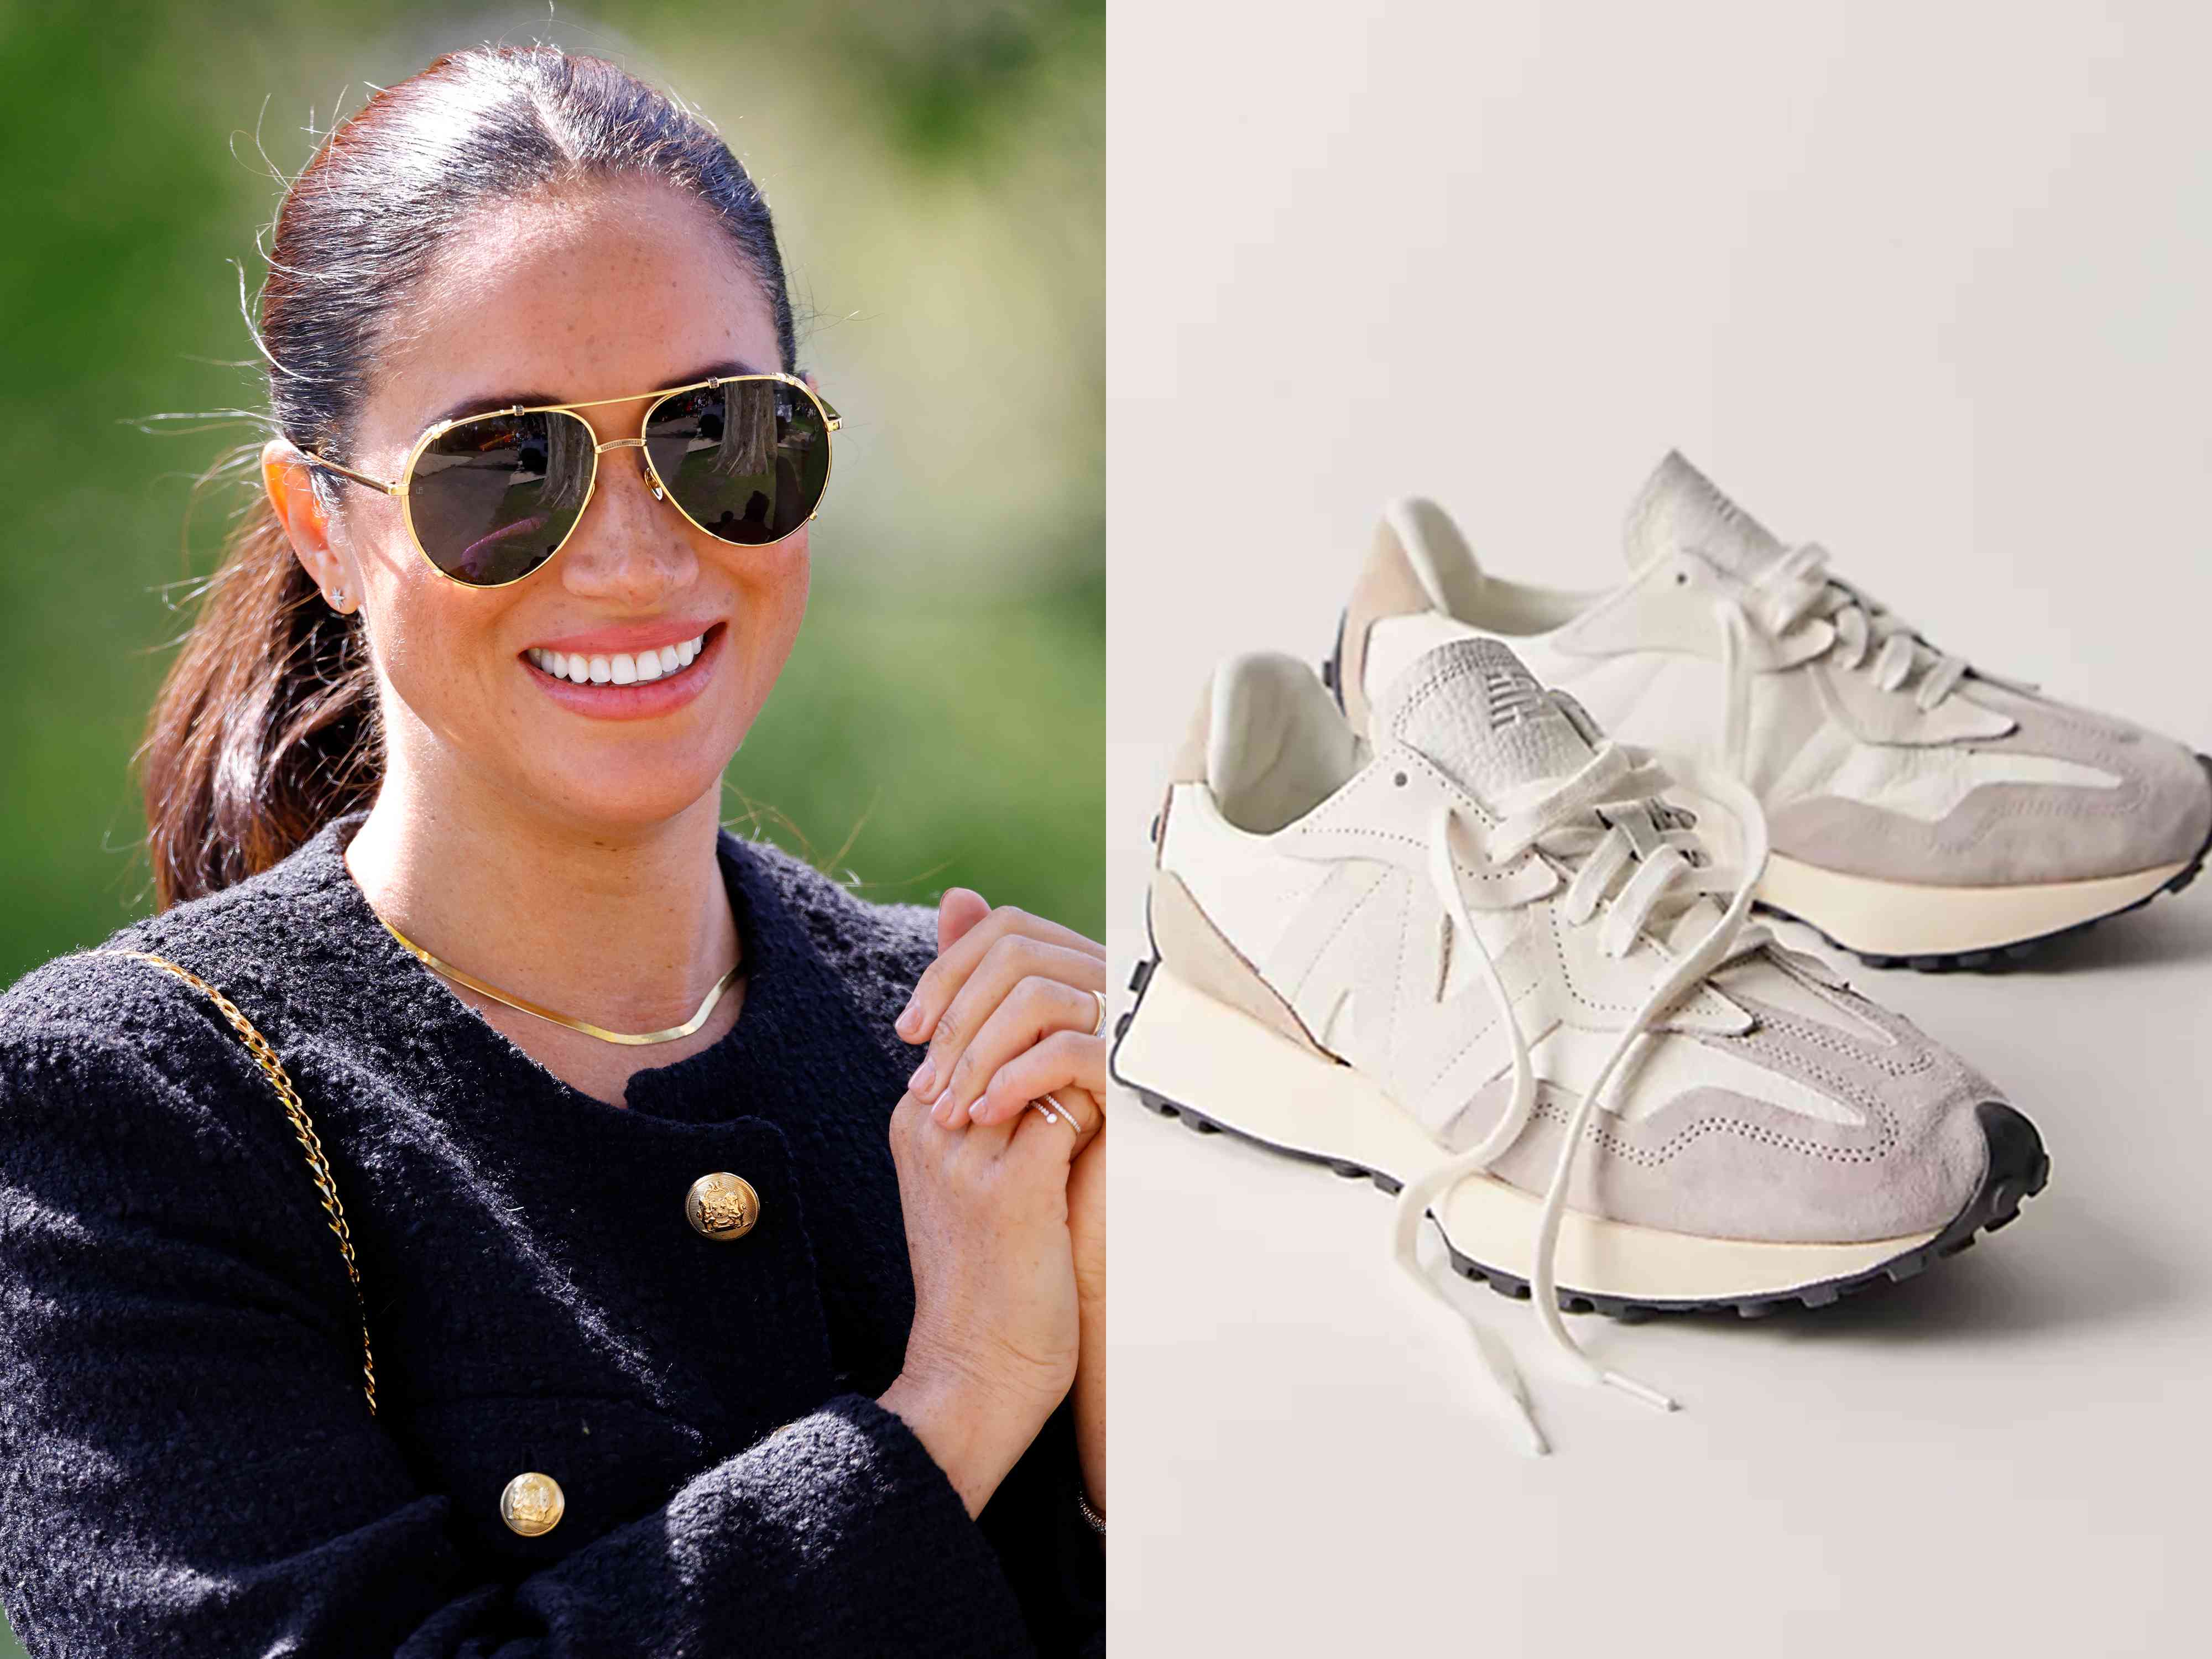 Meghan Markle and Jennifer Aniston Wear This Comfy Sneaker Brand—Here Are 5 Pairs to Shop On Sale